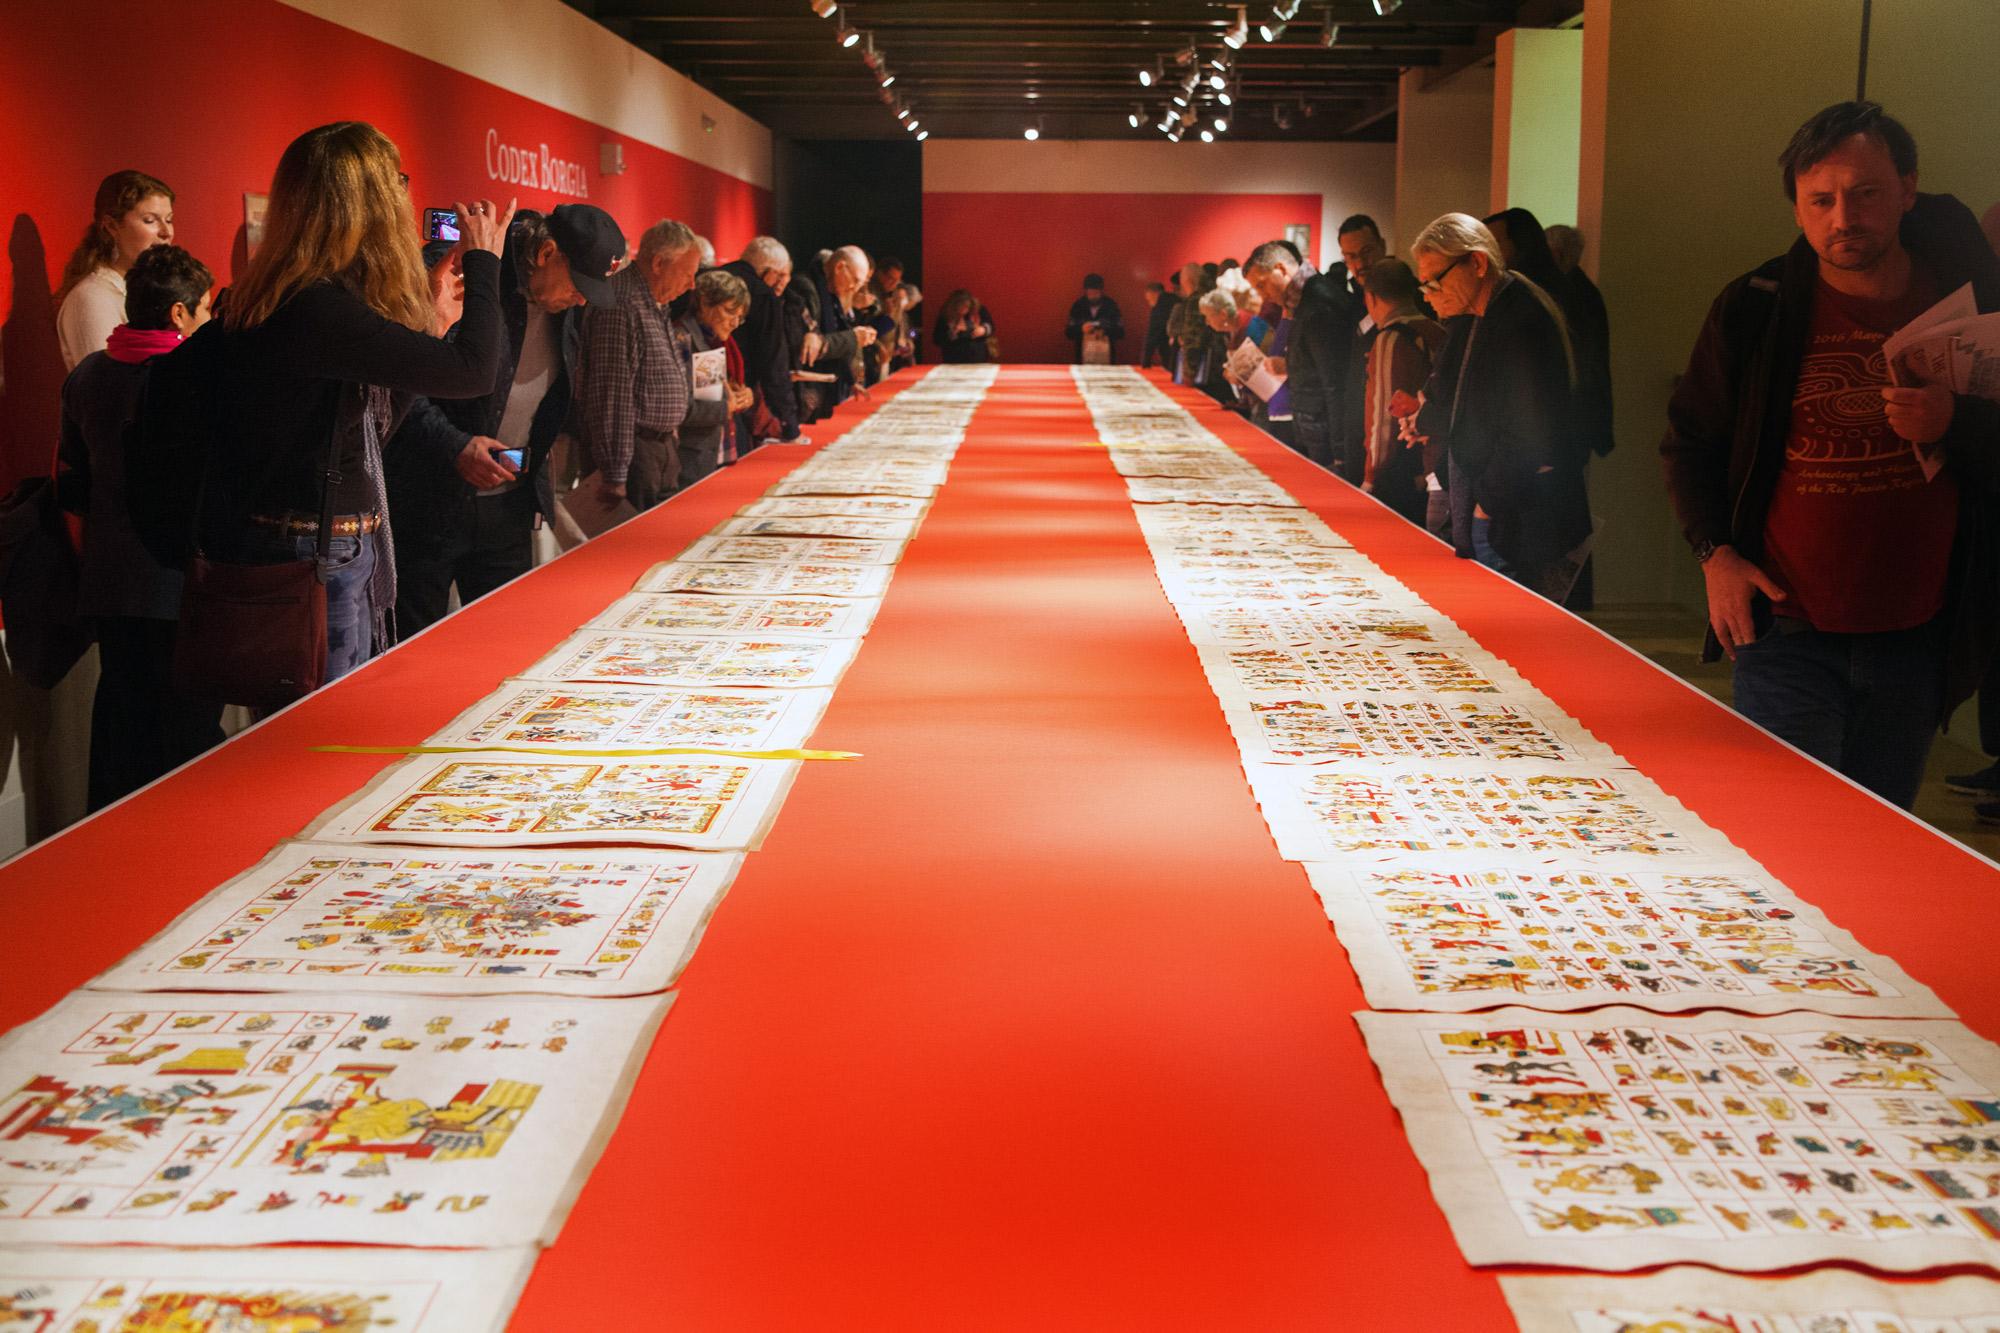 People gather in an art gallery to view hand-painted squares of paper that replicate the Codex Borgia